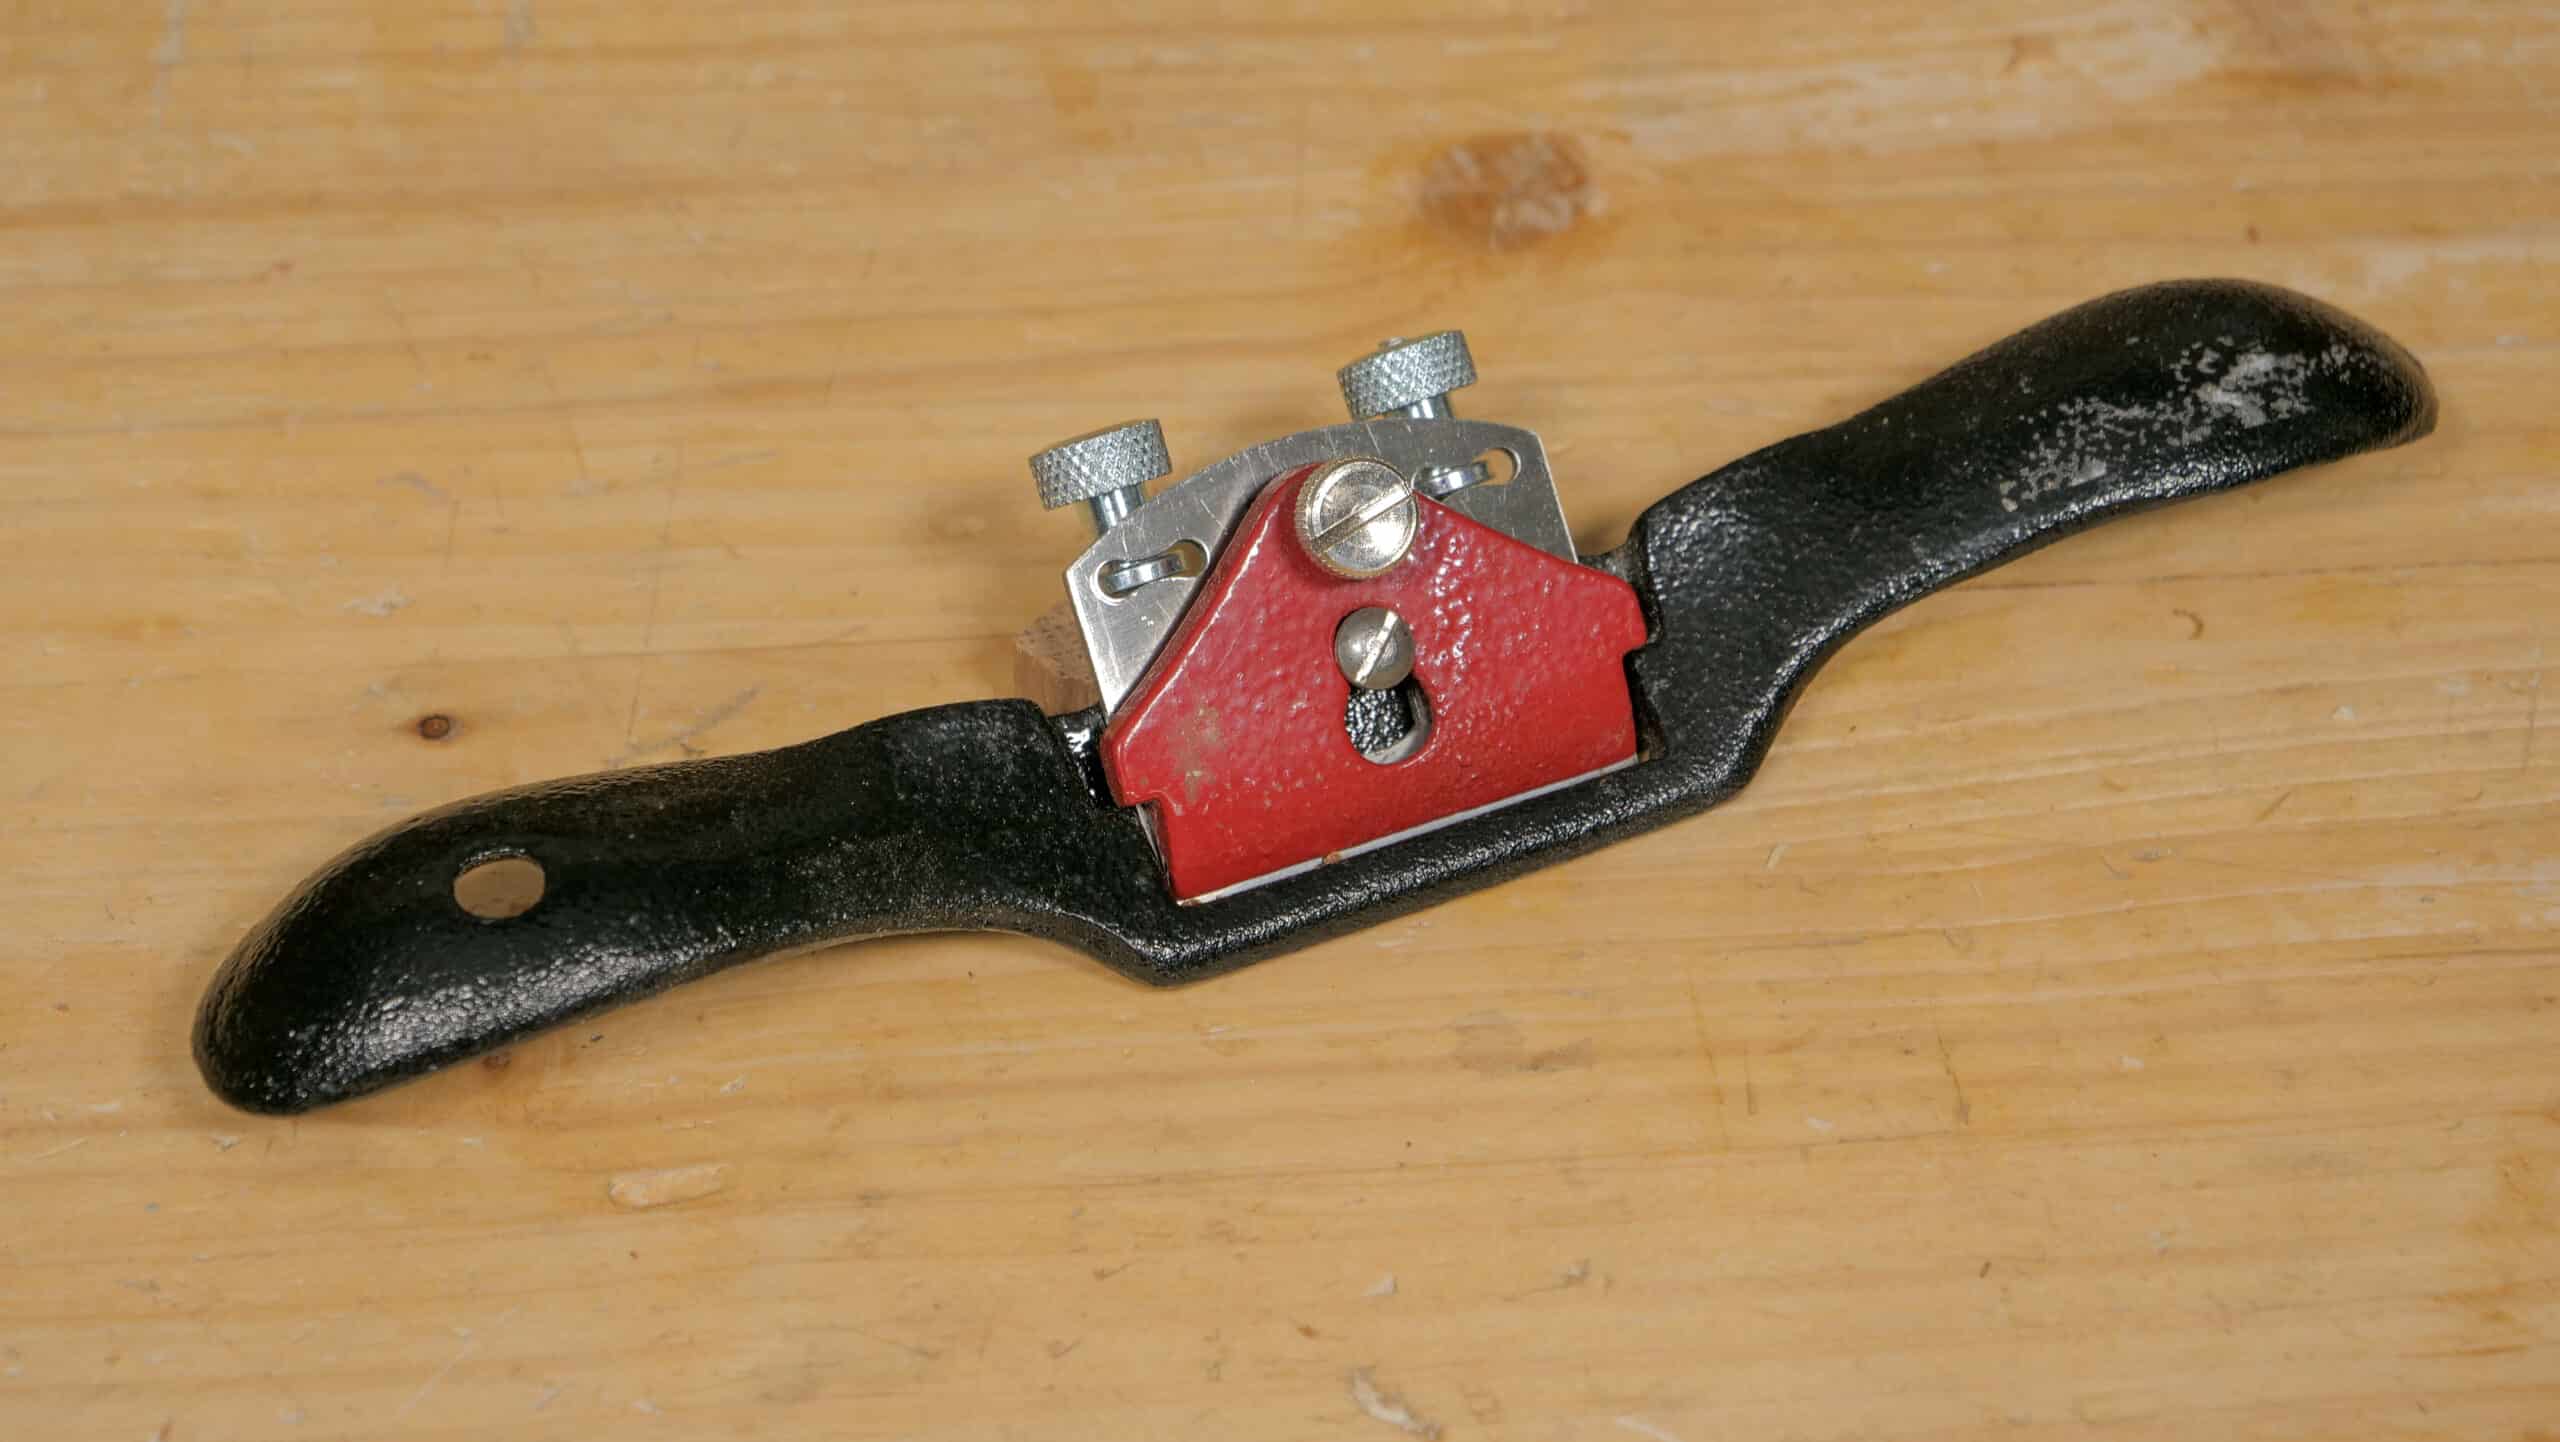 Buying a Spokeshave